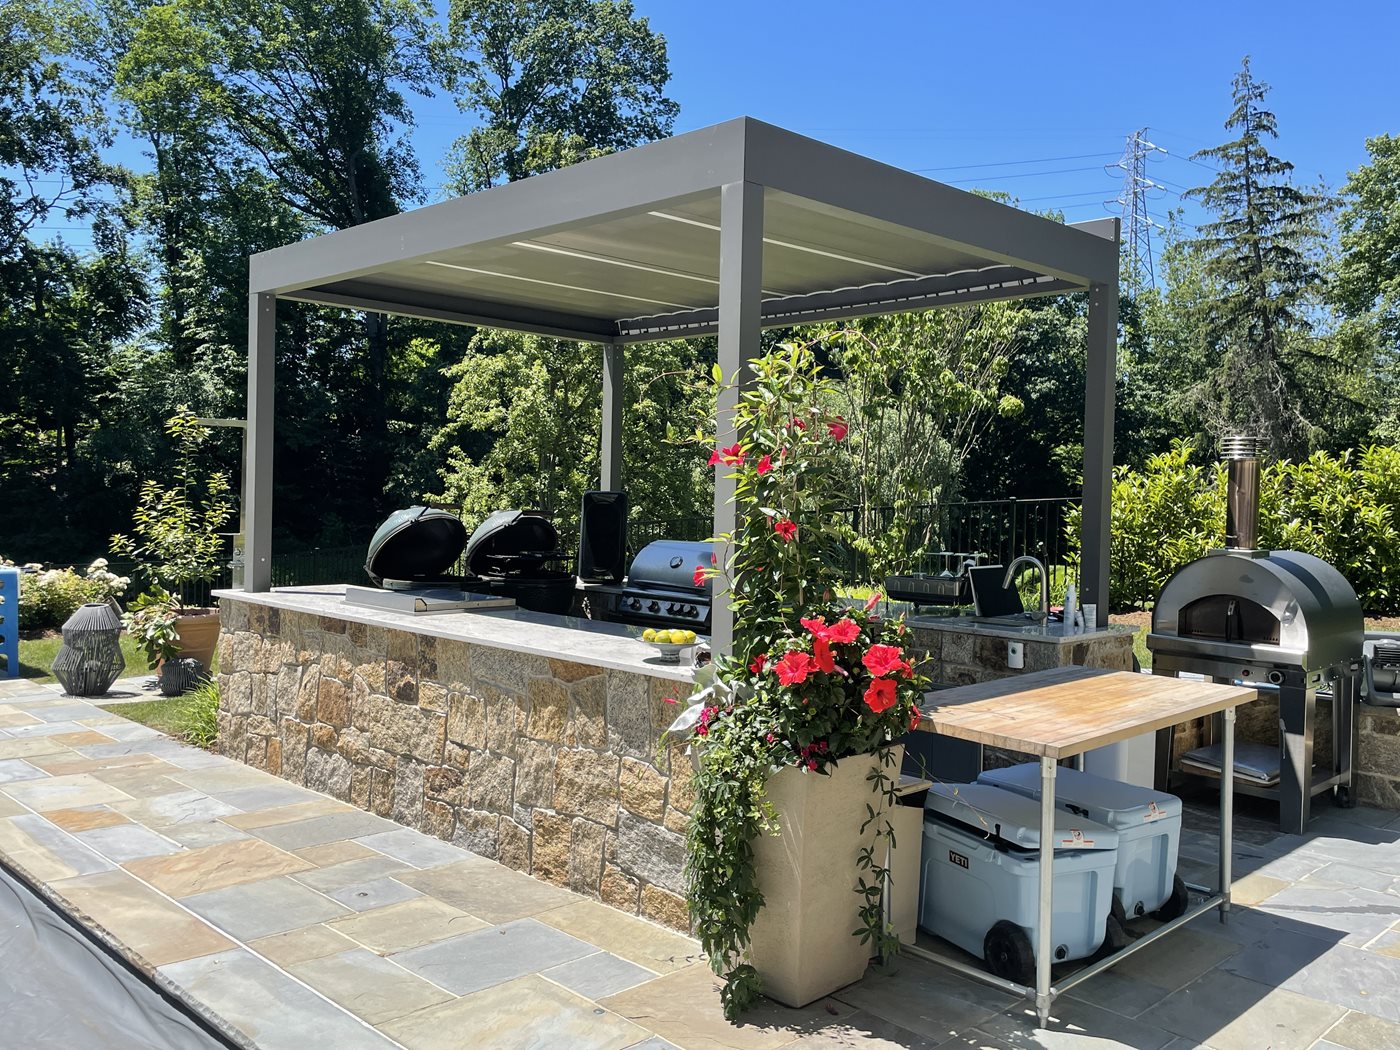 Alba-with-Short-Pillars-Mounted-Over-Outdoor-Kitchen-Area-by-New-Haven-Awning-(1).JPG